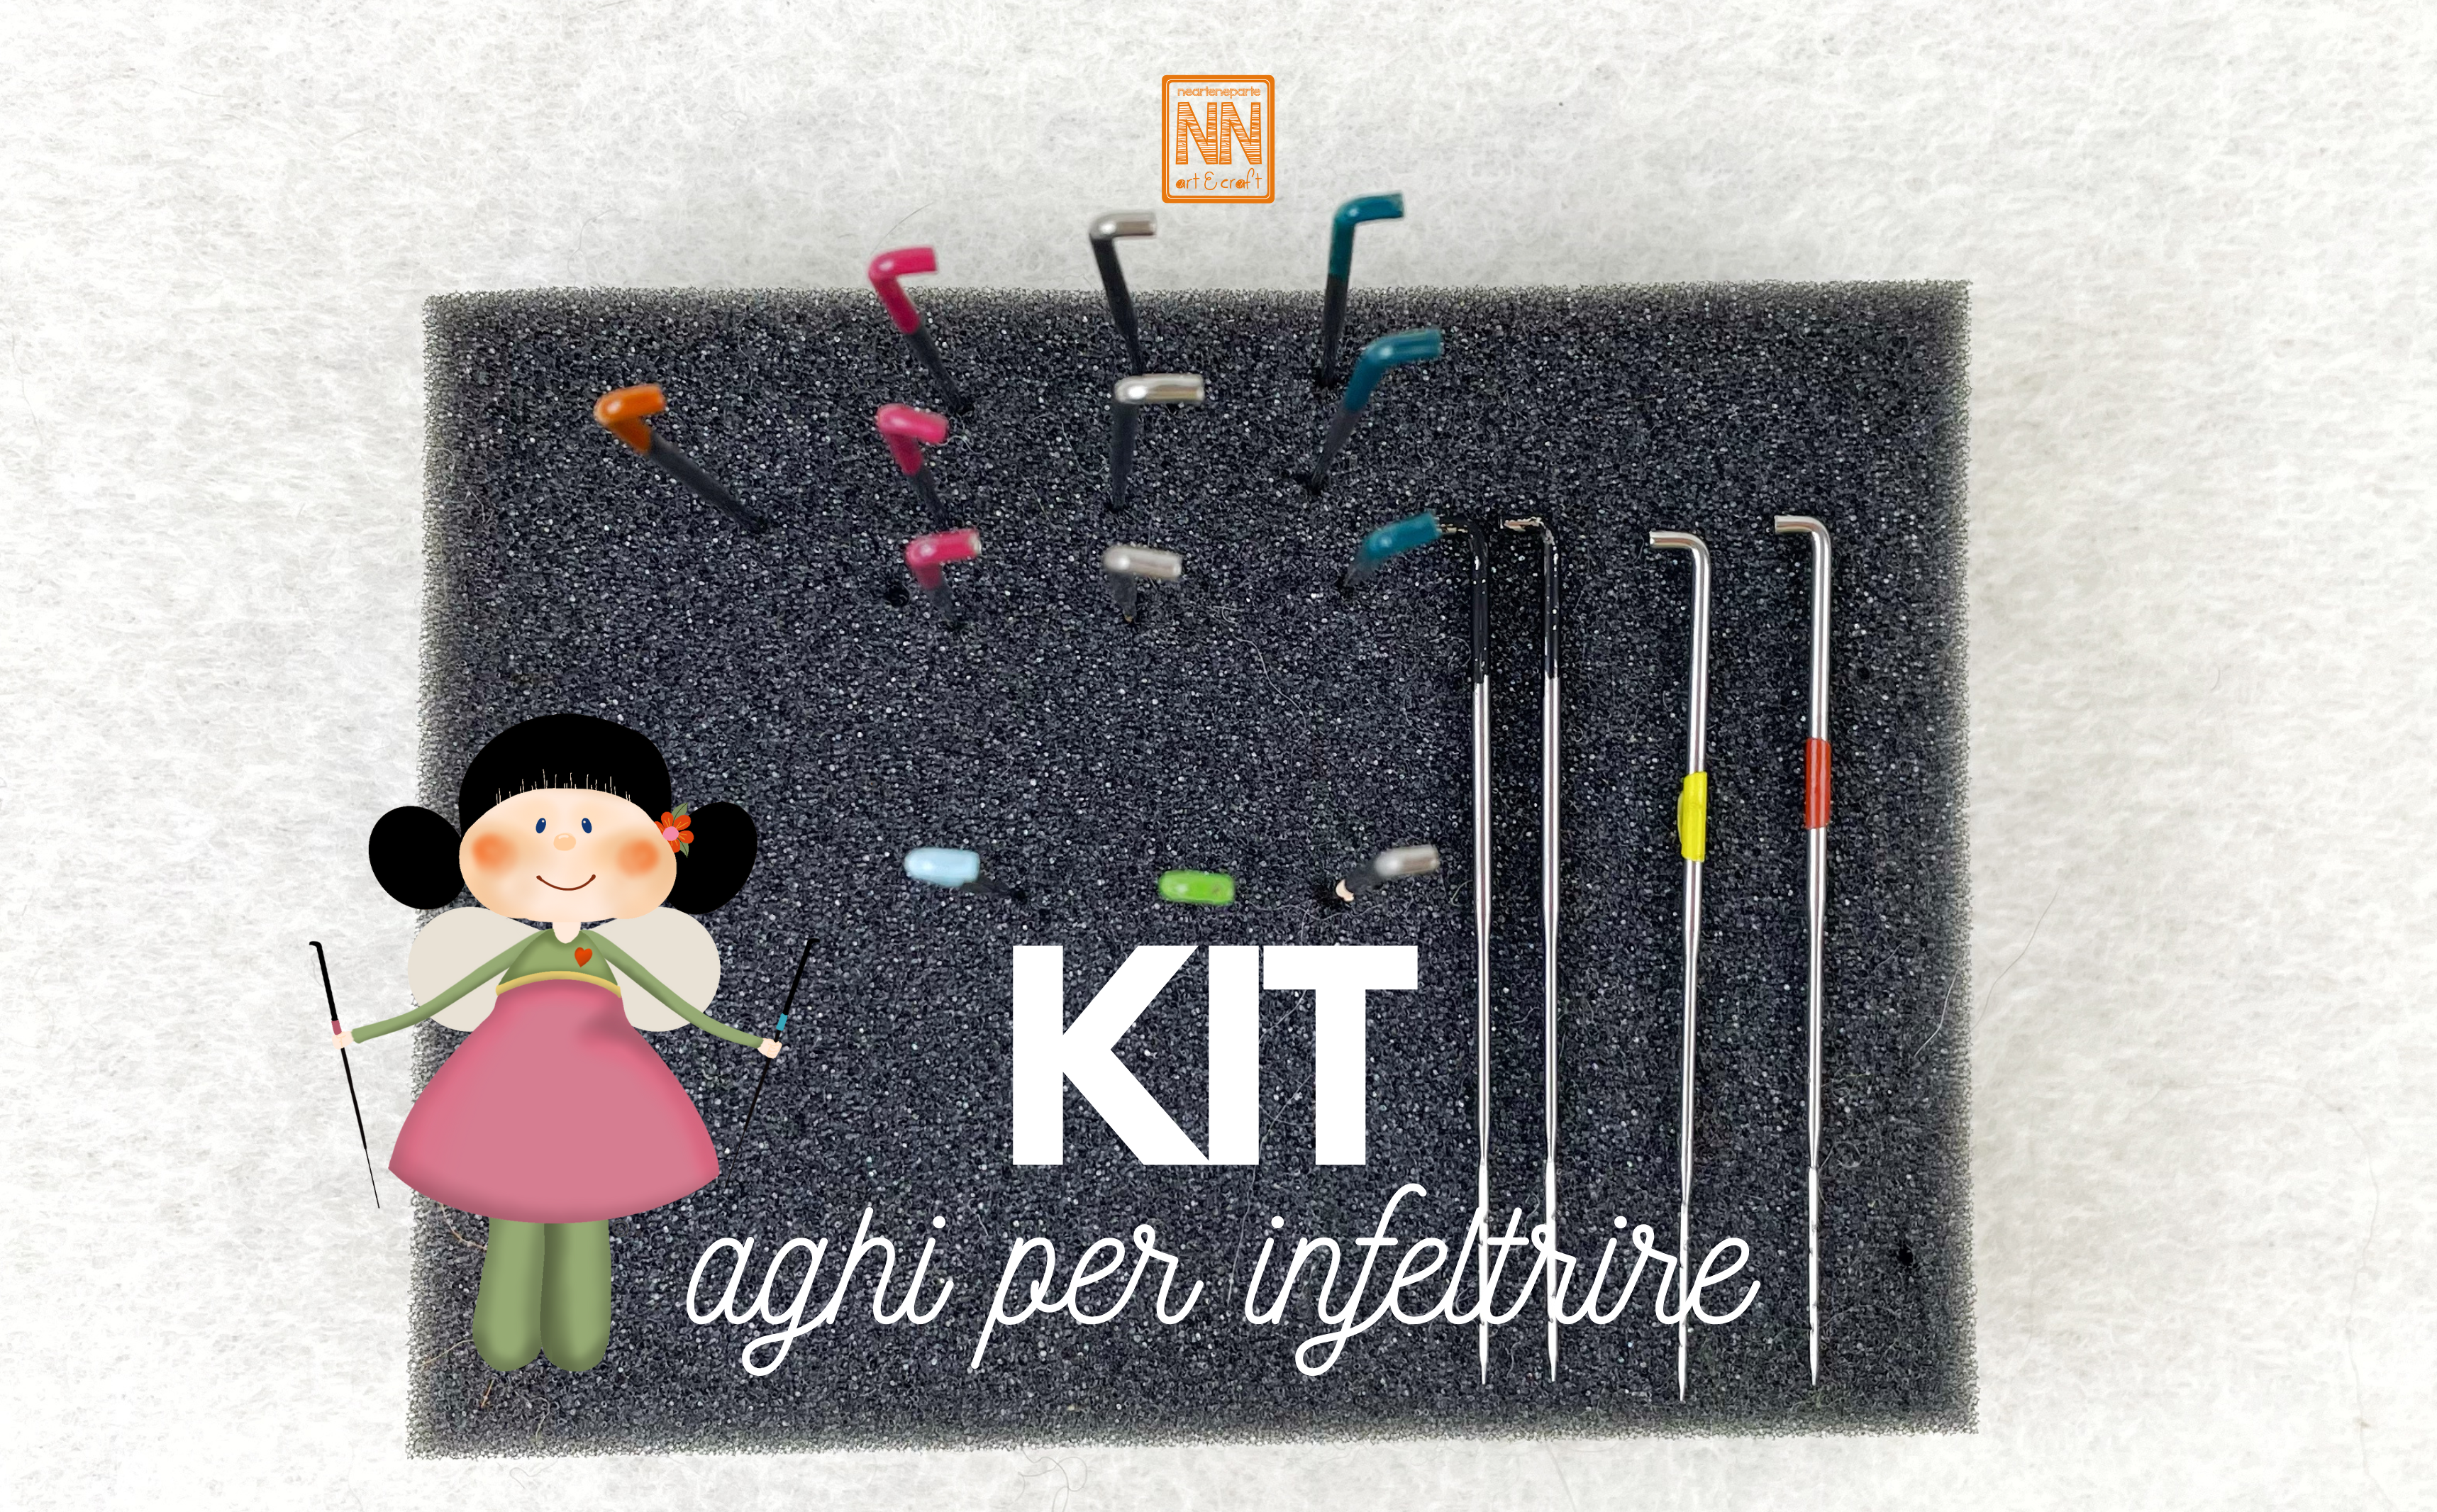 Kit aghi per infeltrire